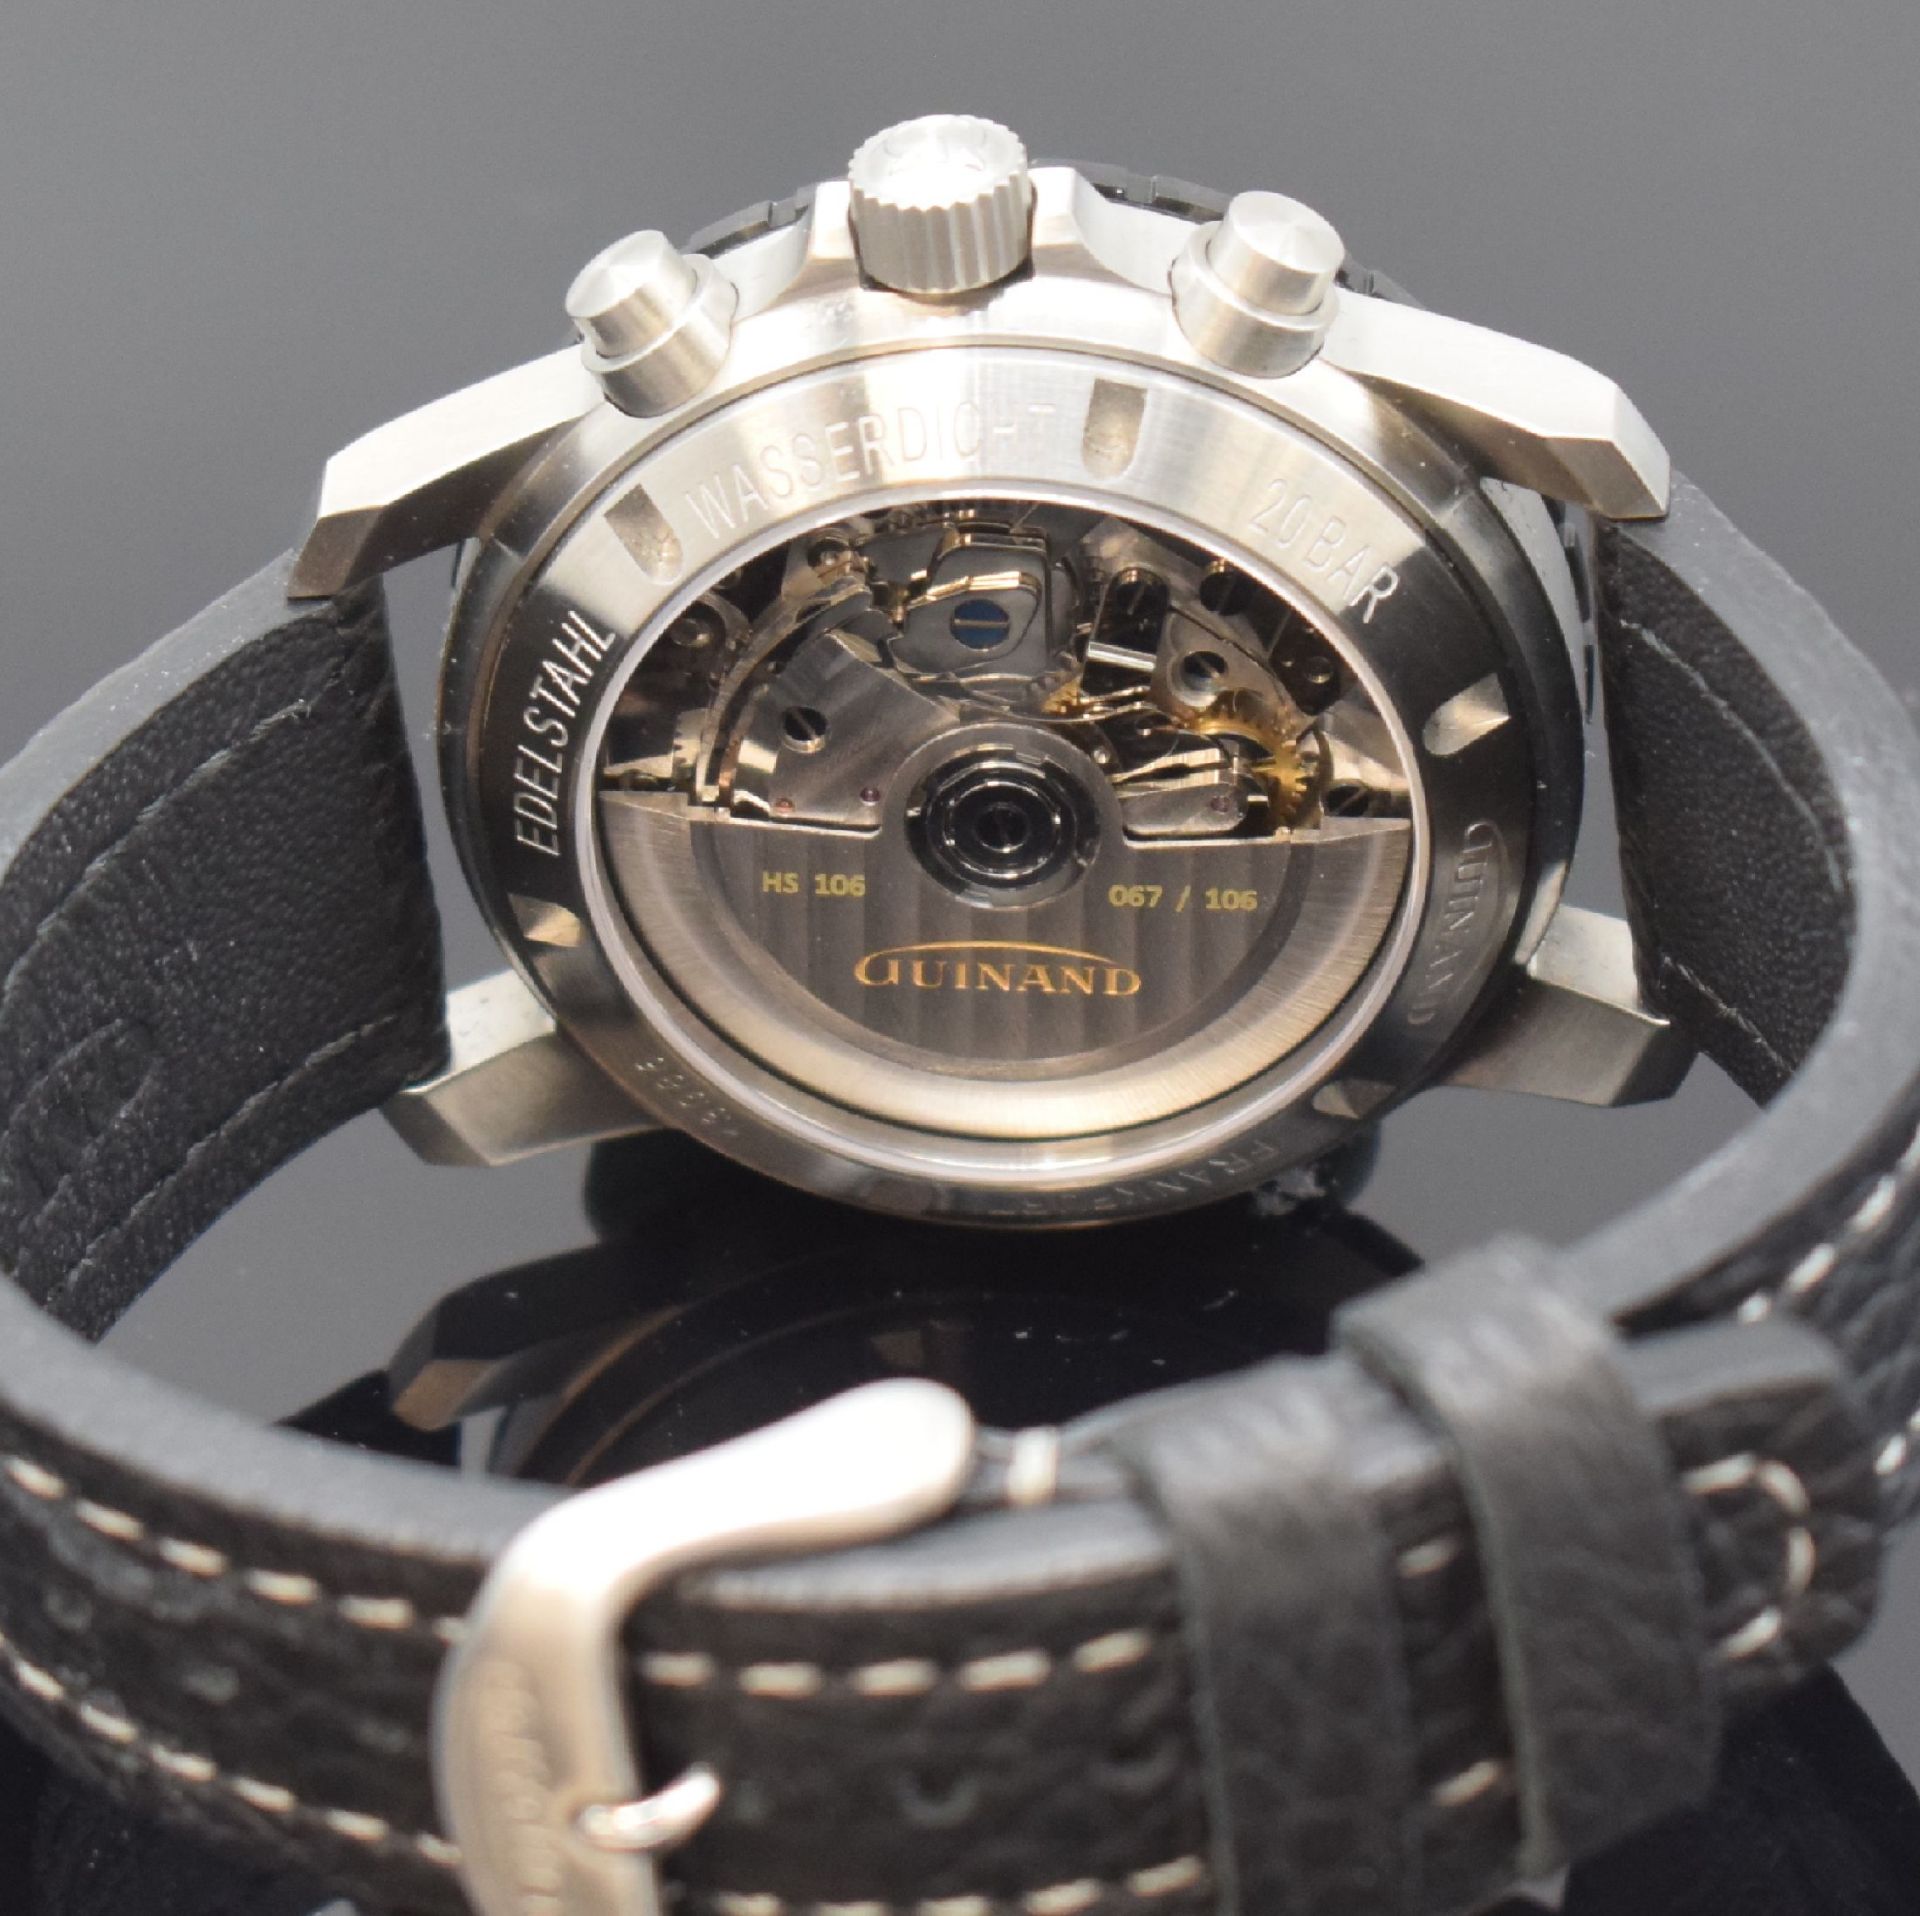 GUINAND Jubiläums-Armbandchronograph in Stahl, Automatik, - Image 3 of 8